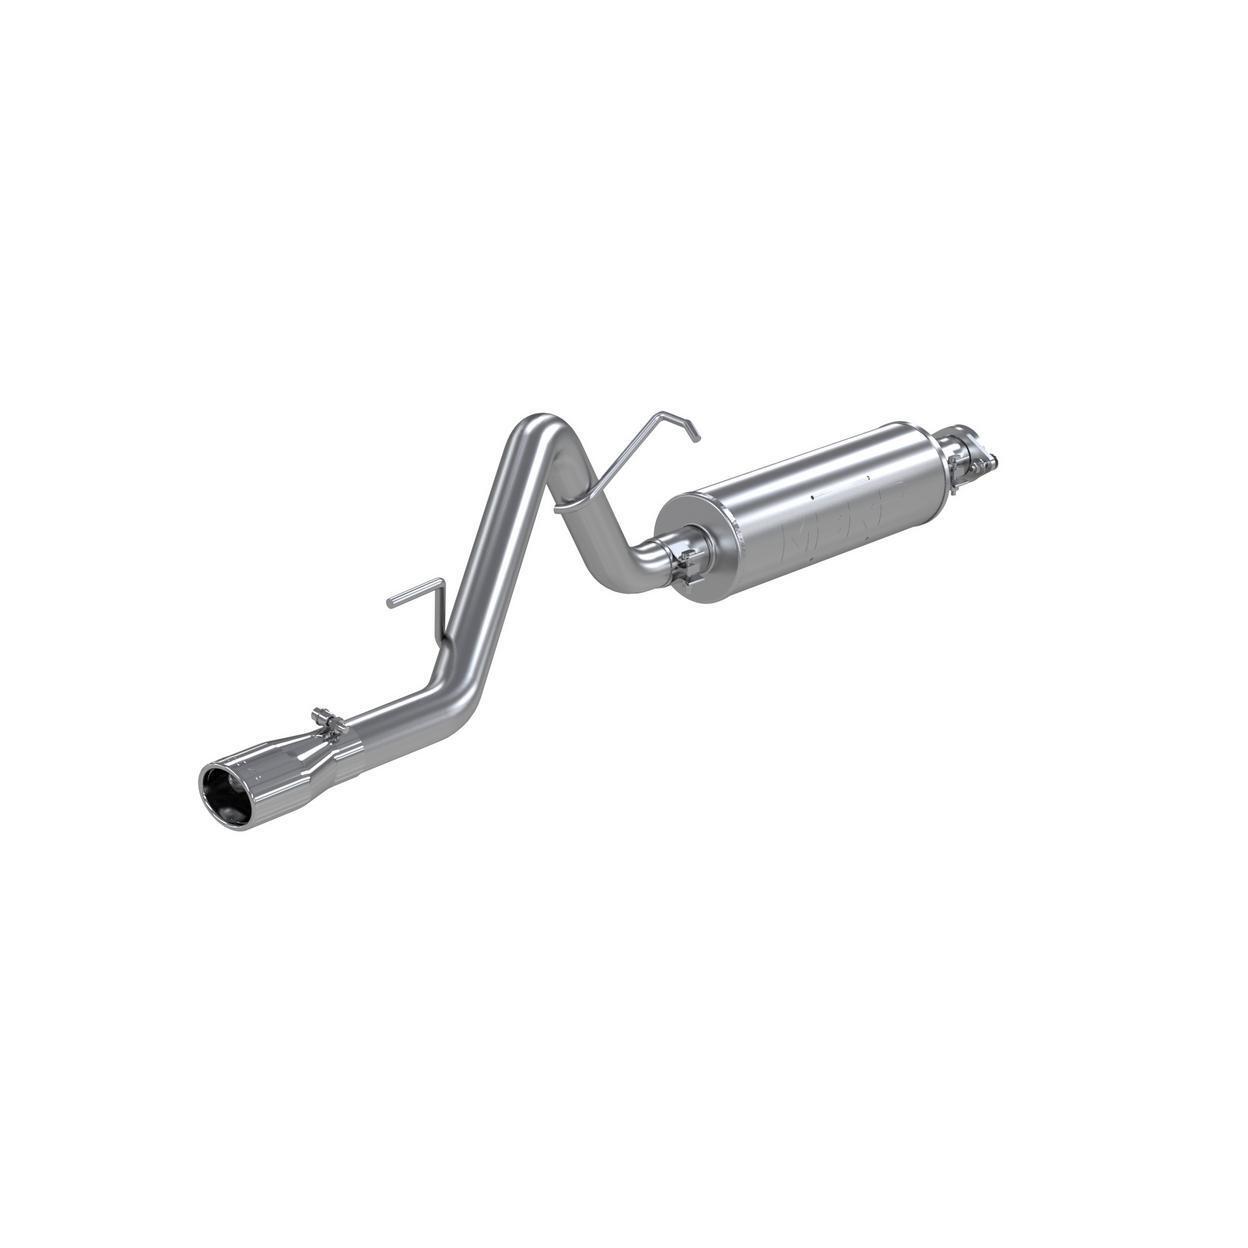 Exhaust System Kit for 2006 Jeep Liberty 3.7L V6 GAS SOHC